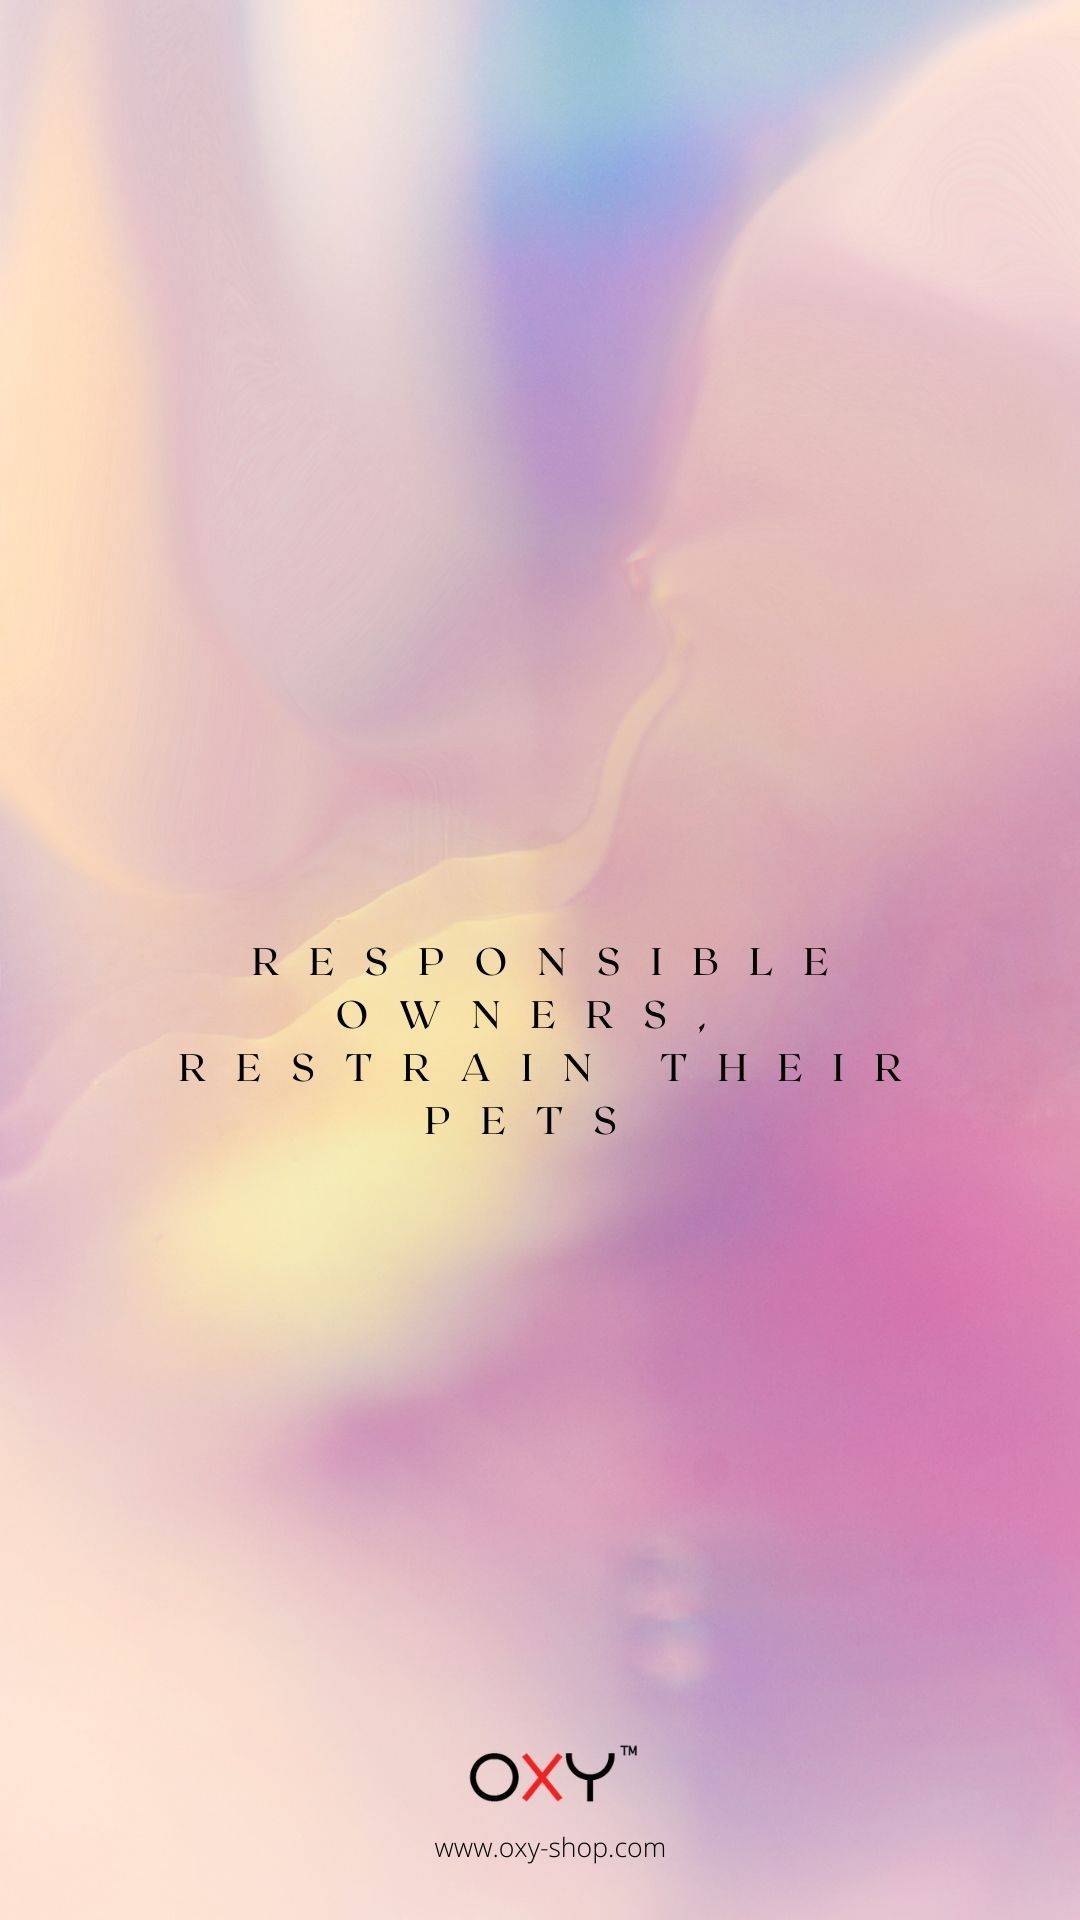 Responsible Owners, Restrain their Pets. - BDSM wallpaper 